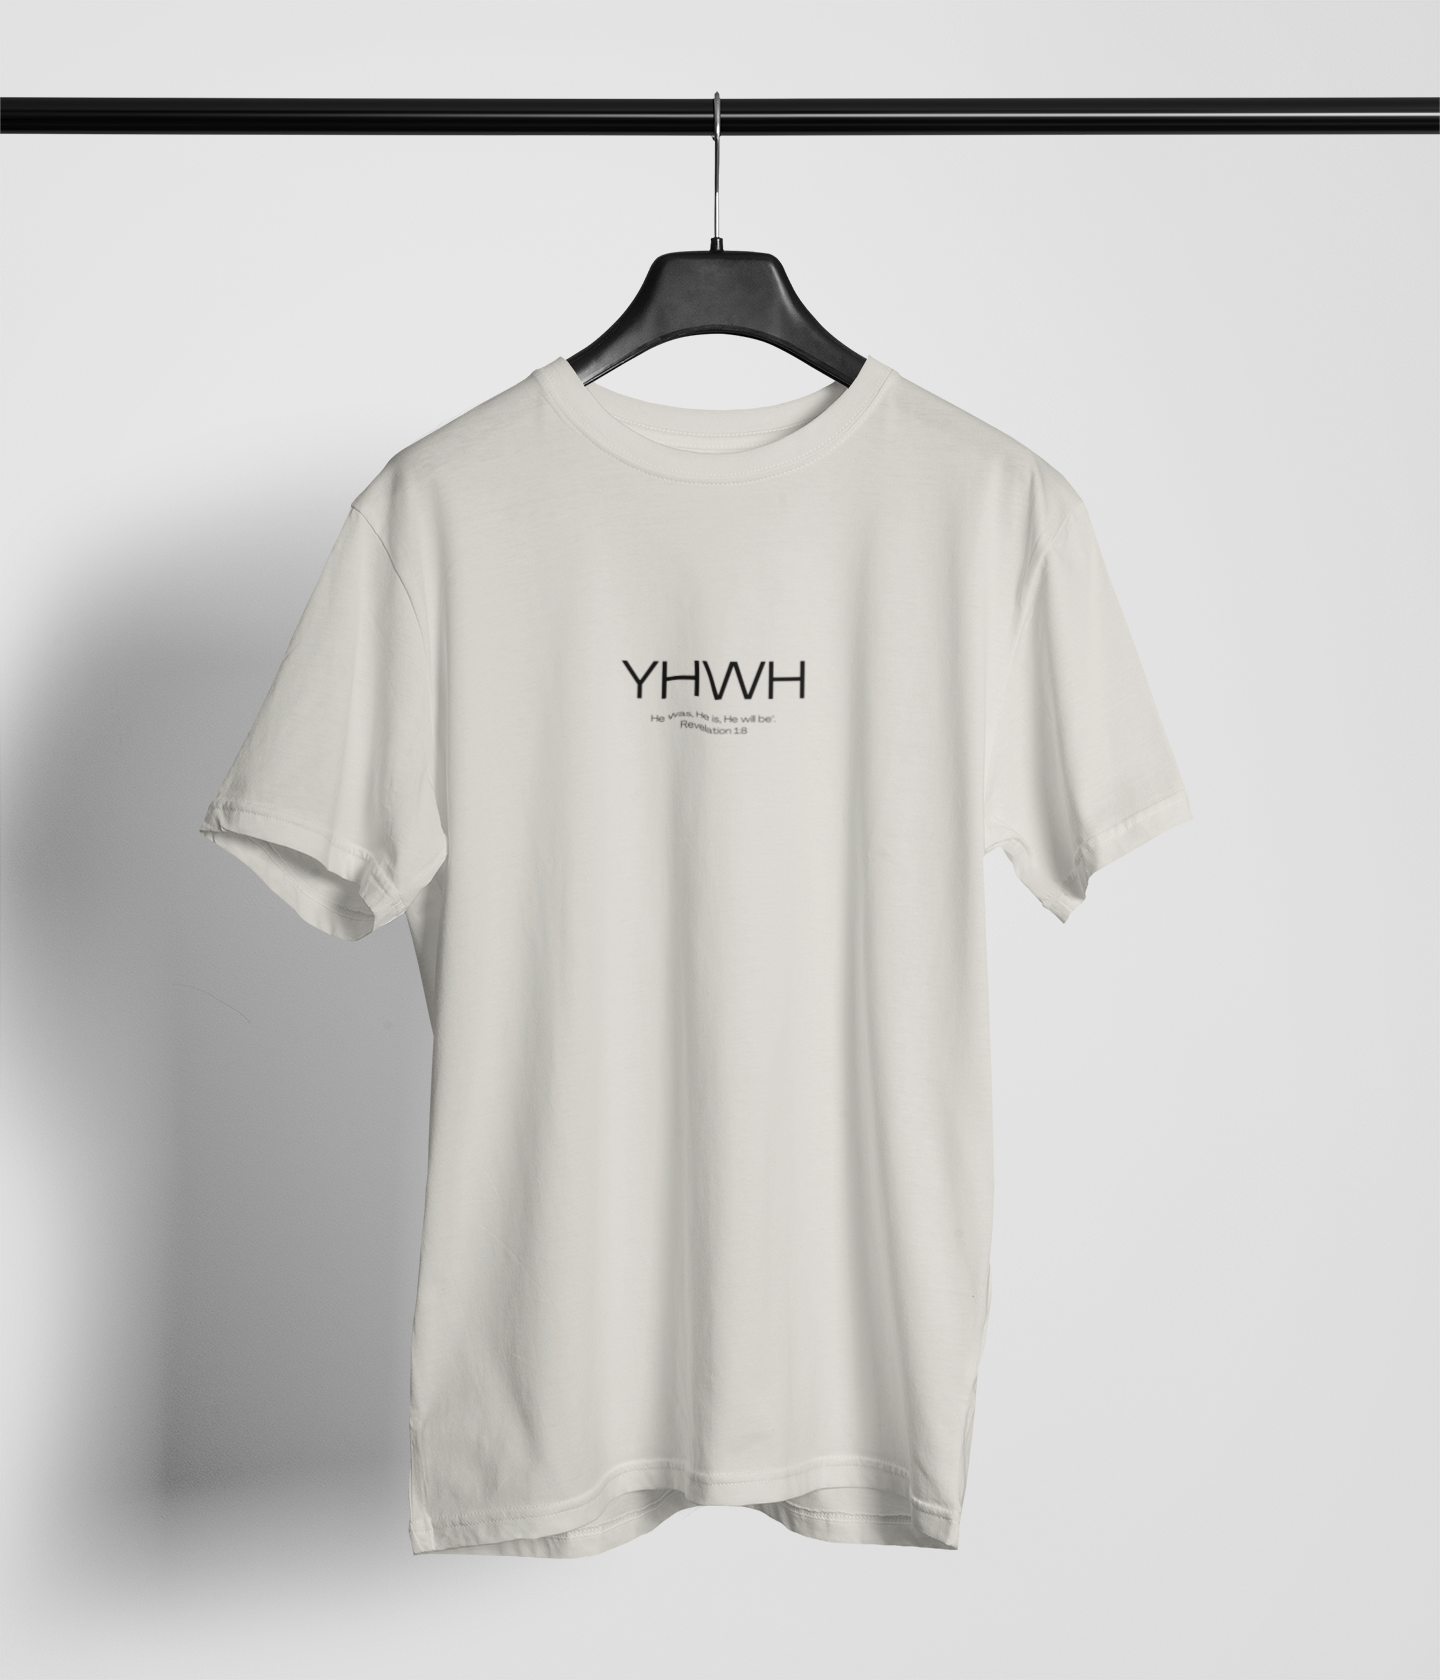 YHWH: Breathing the Name of God Active T-Shirt for Sale by misslovelymess